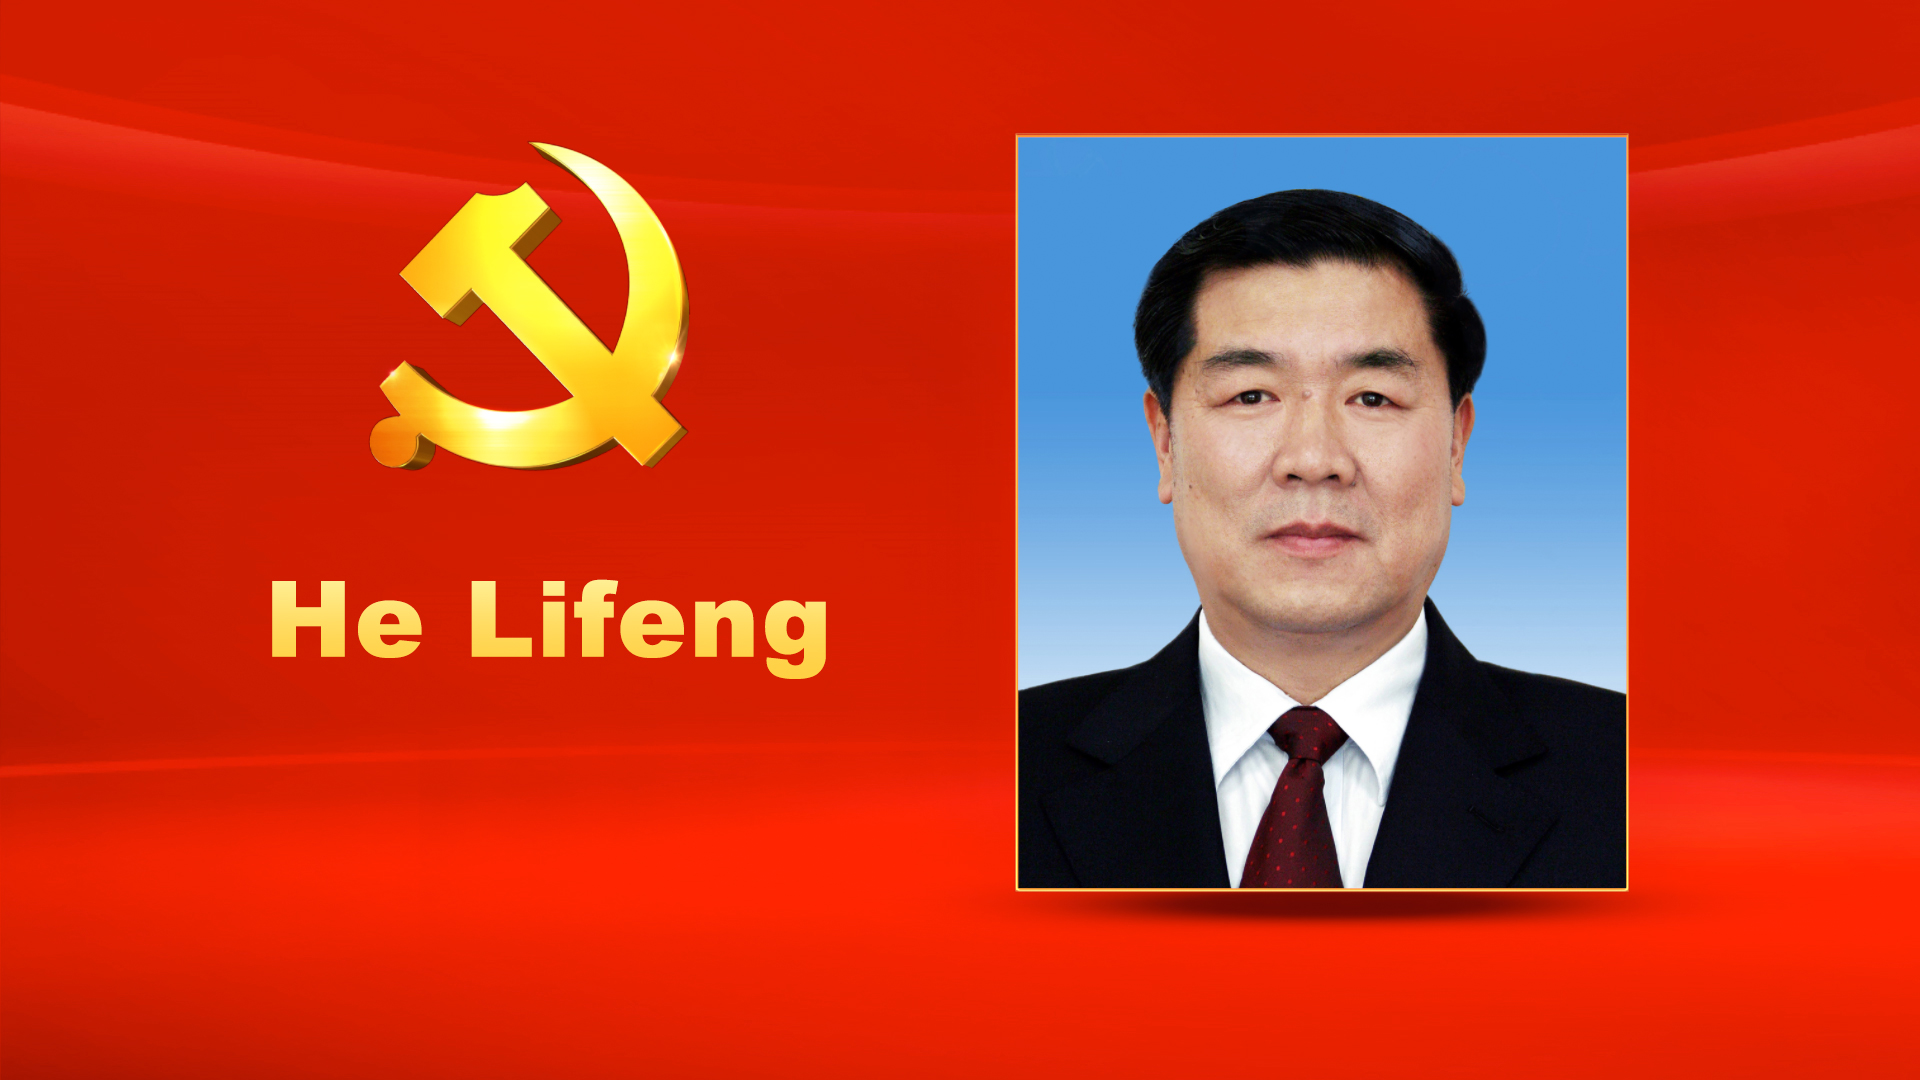 He Lifeng, male, Han ethnicity, was born in February 1955 and is from Xingning, Guangdong Province. He began his first job in August 1973 and joined the Communist Party of China (CPC) in June 1981. He graduated from Department of Public Finance and Economics, Xiamen University where he completed a graduate program in public finance. He holds a Doctor of Economics degree. He is currently a member of the CPC Central Committee Political Bureau, Vice Chairman and Leading Party Members Group member of the 13th National Committee of the Chinese People's Political Consultative Conference, and Director and Leading Party Members Group Secretary of the National Development and Reform Commission.